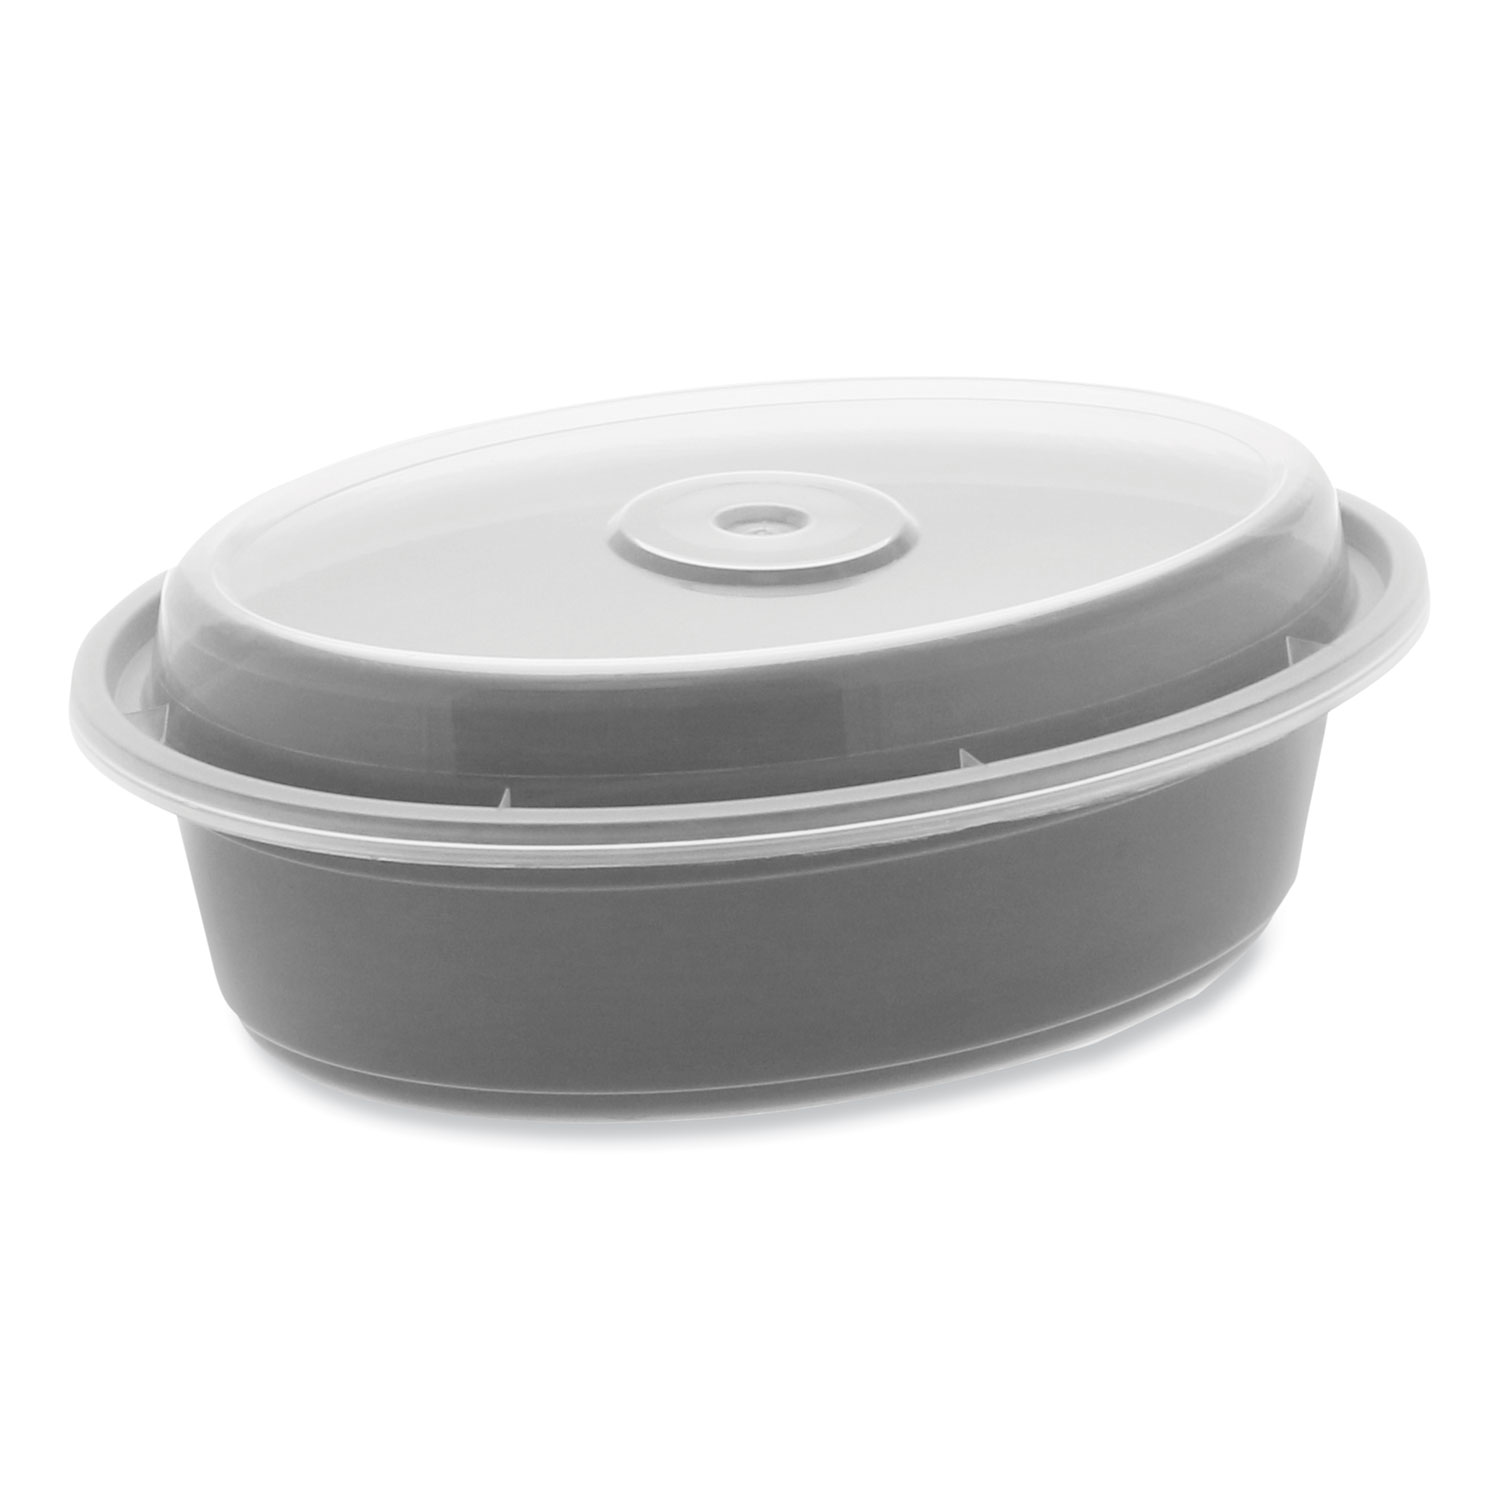 Glad Containers & Lids, Round, Snack Size, 1.75 Cups